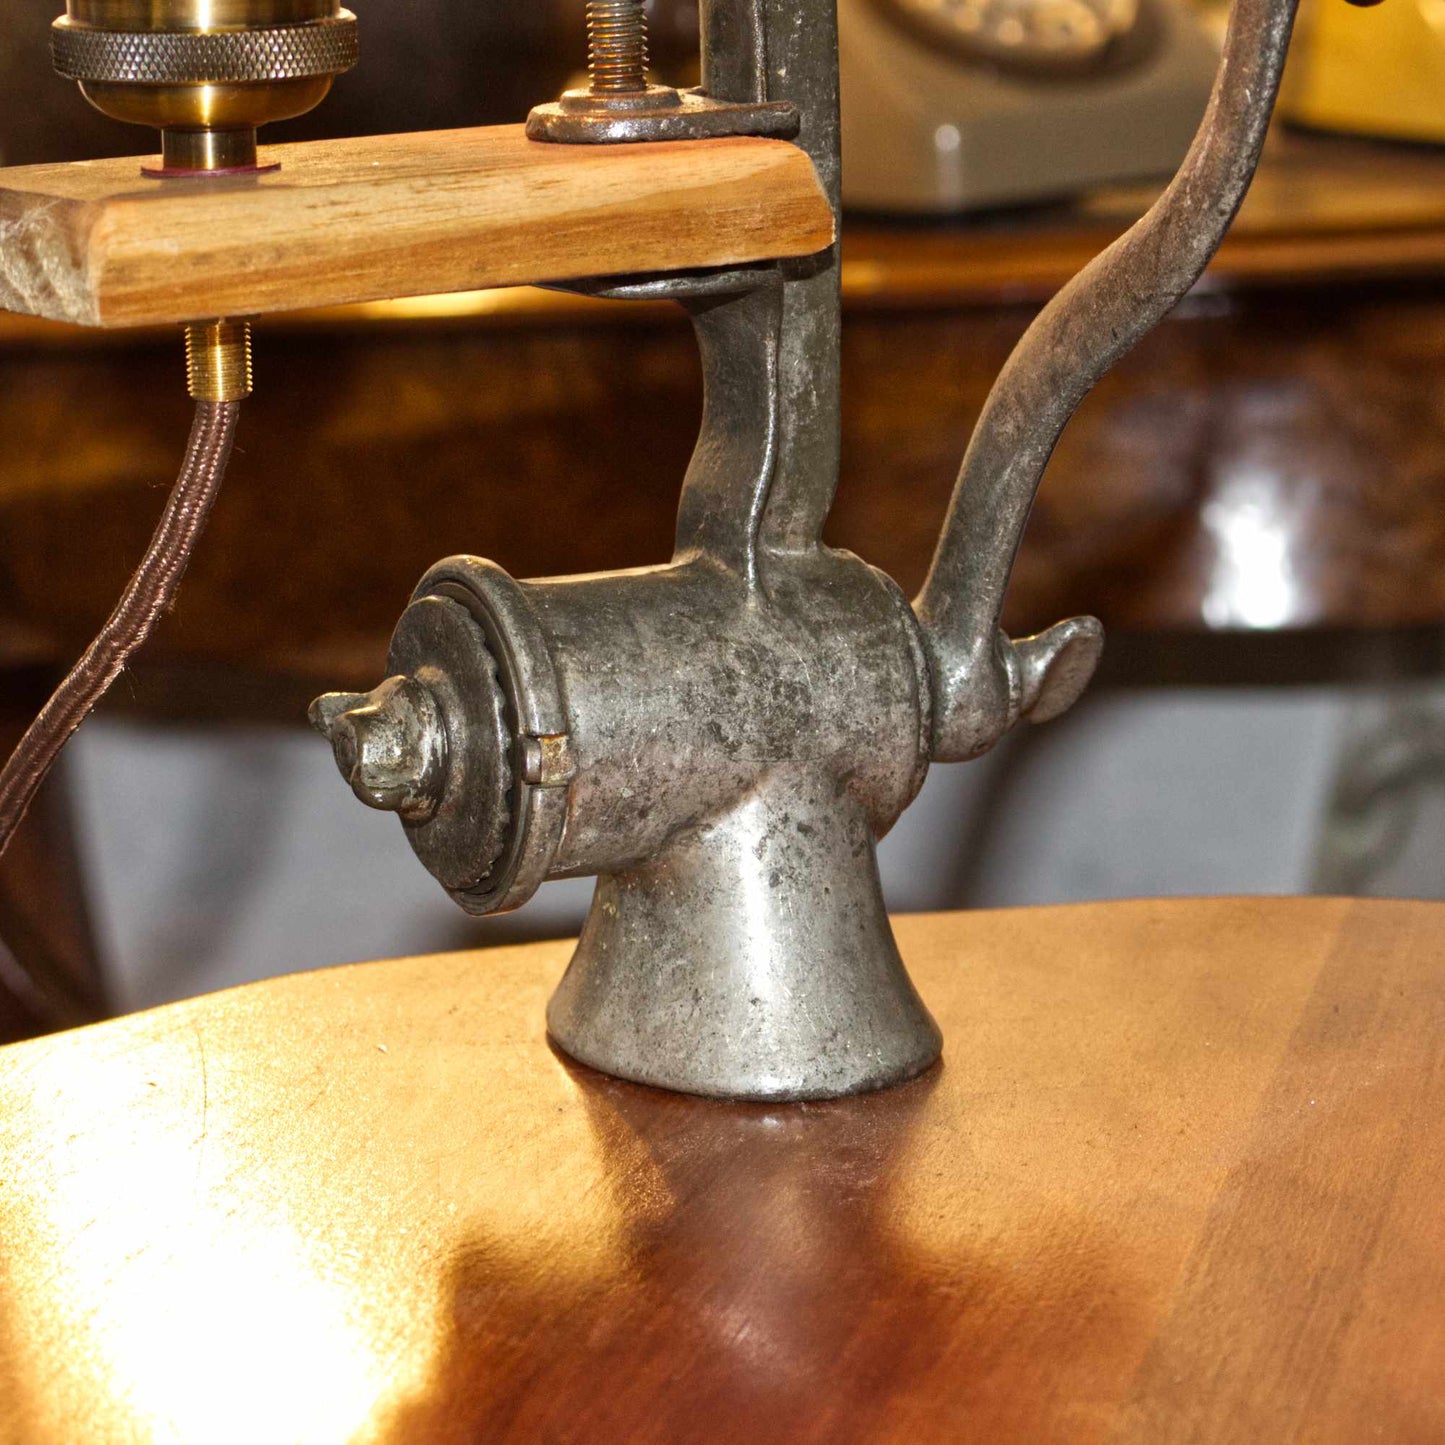 Vintage Up Cycled Re-Purposed Mincer Lamp